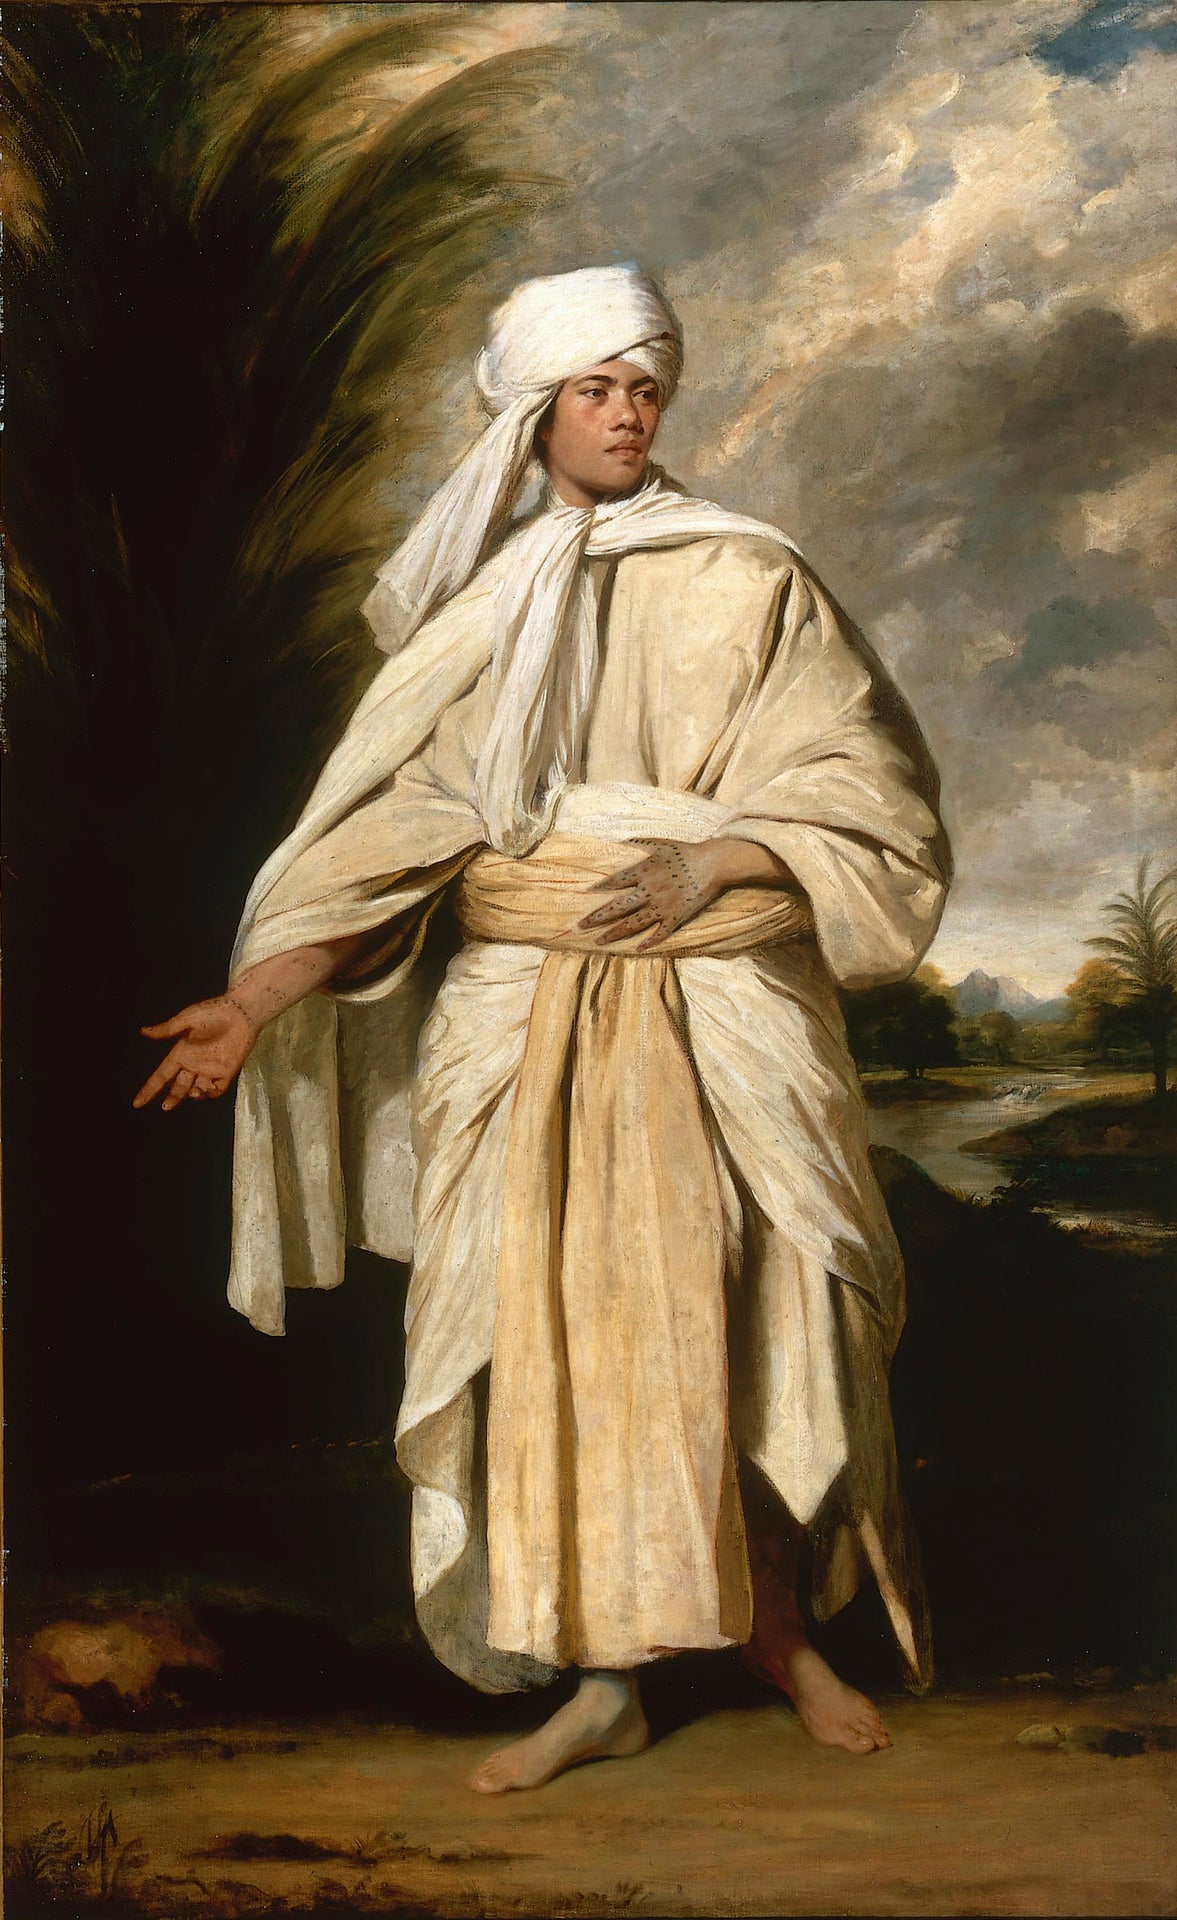 Omai travelled to England with the second expedition of Captain Cook